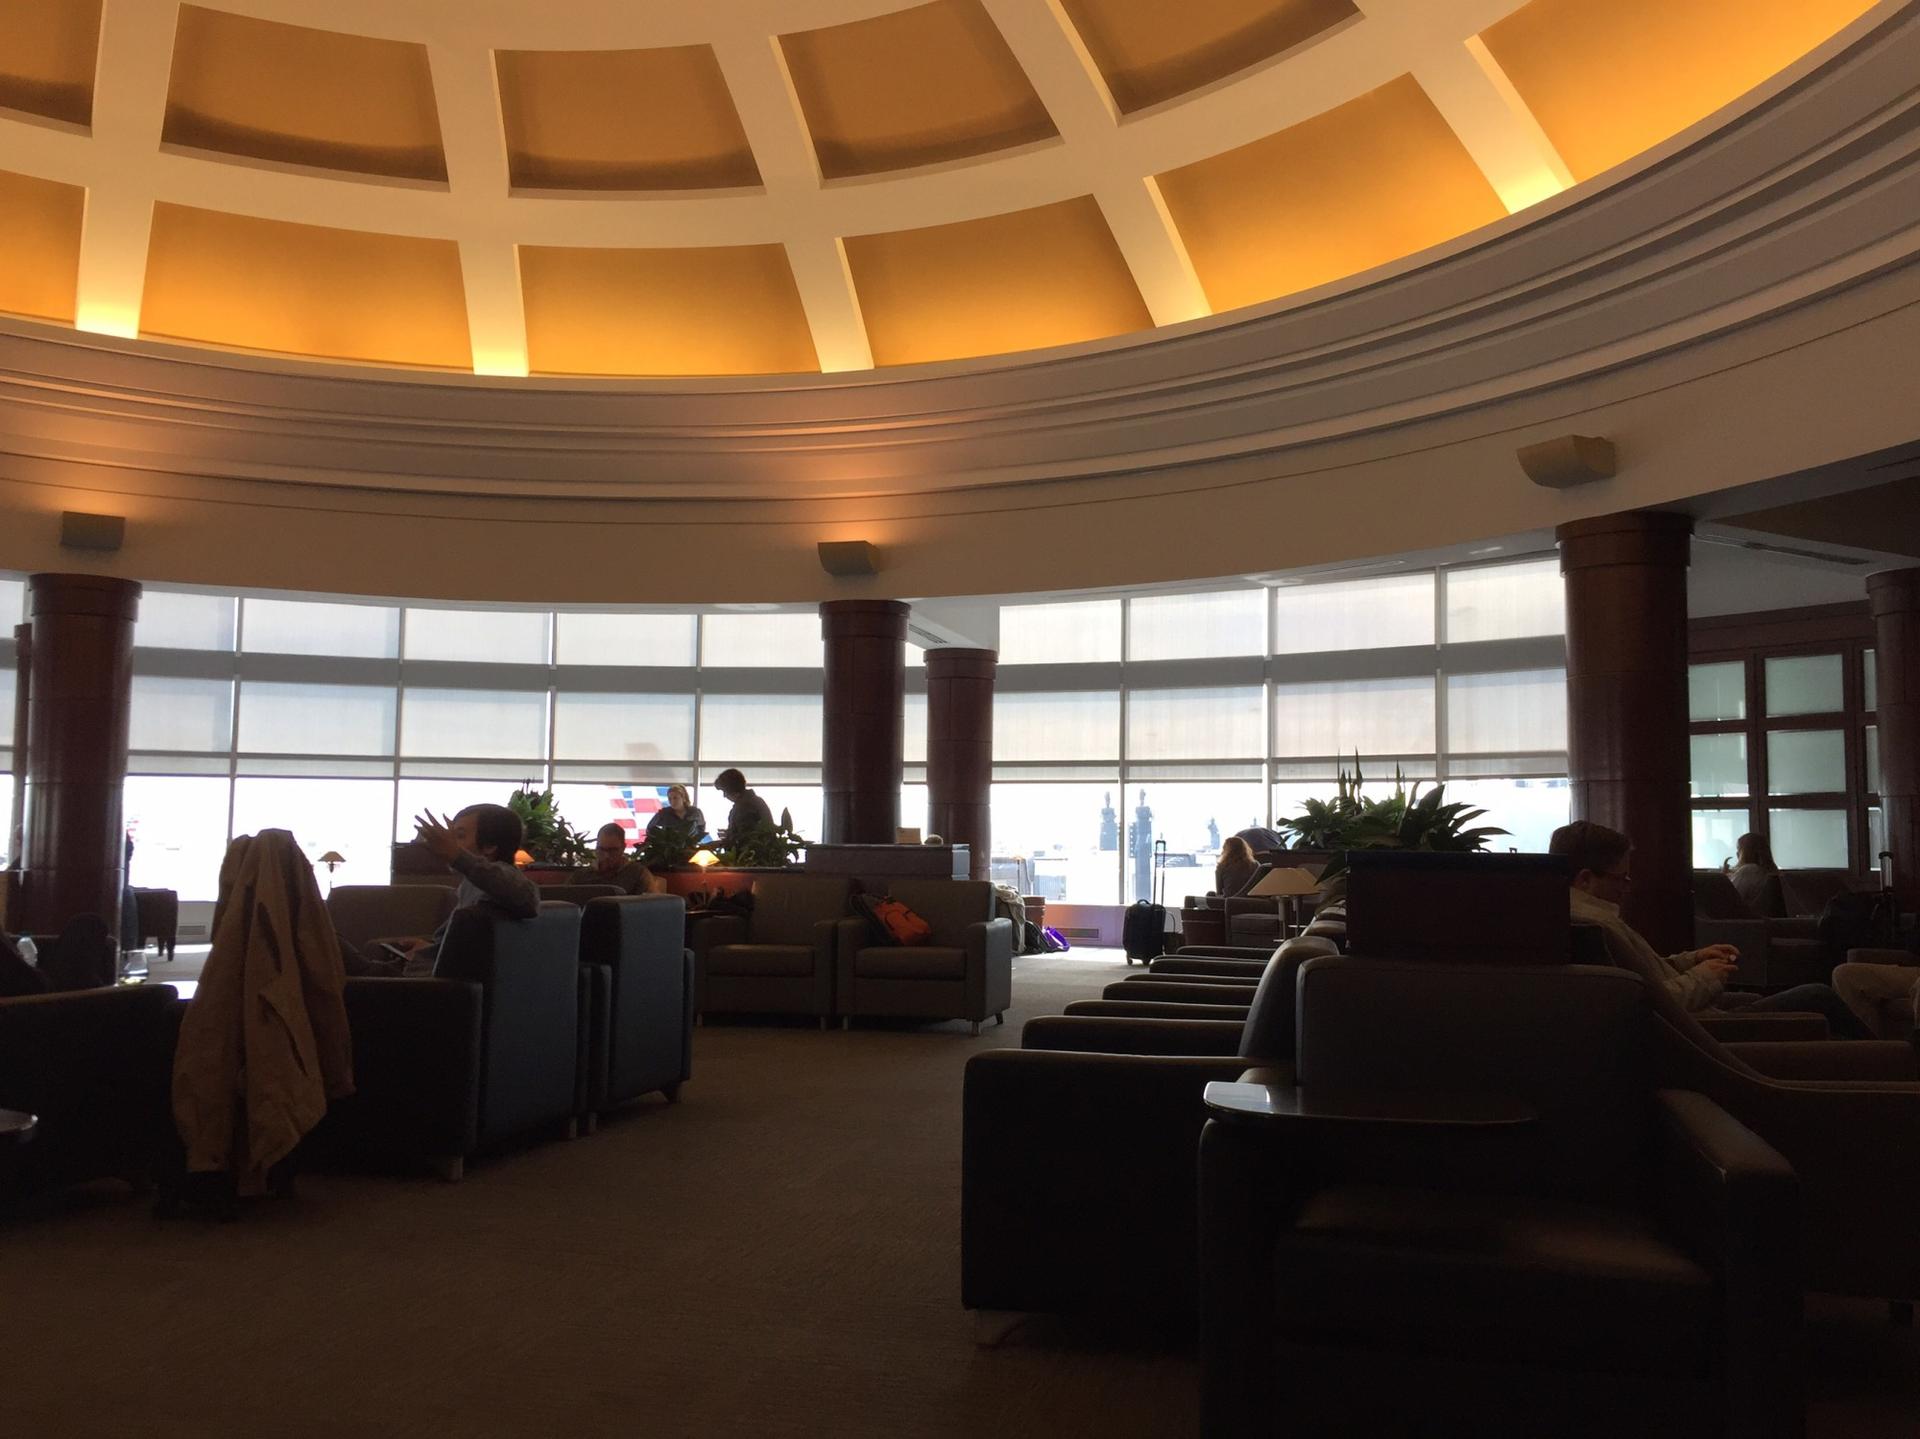 American Airlines Admirals Club image 27 of 37